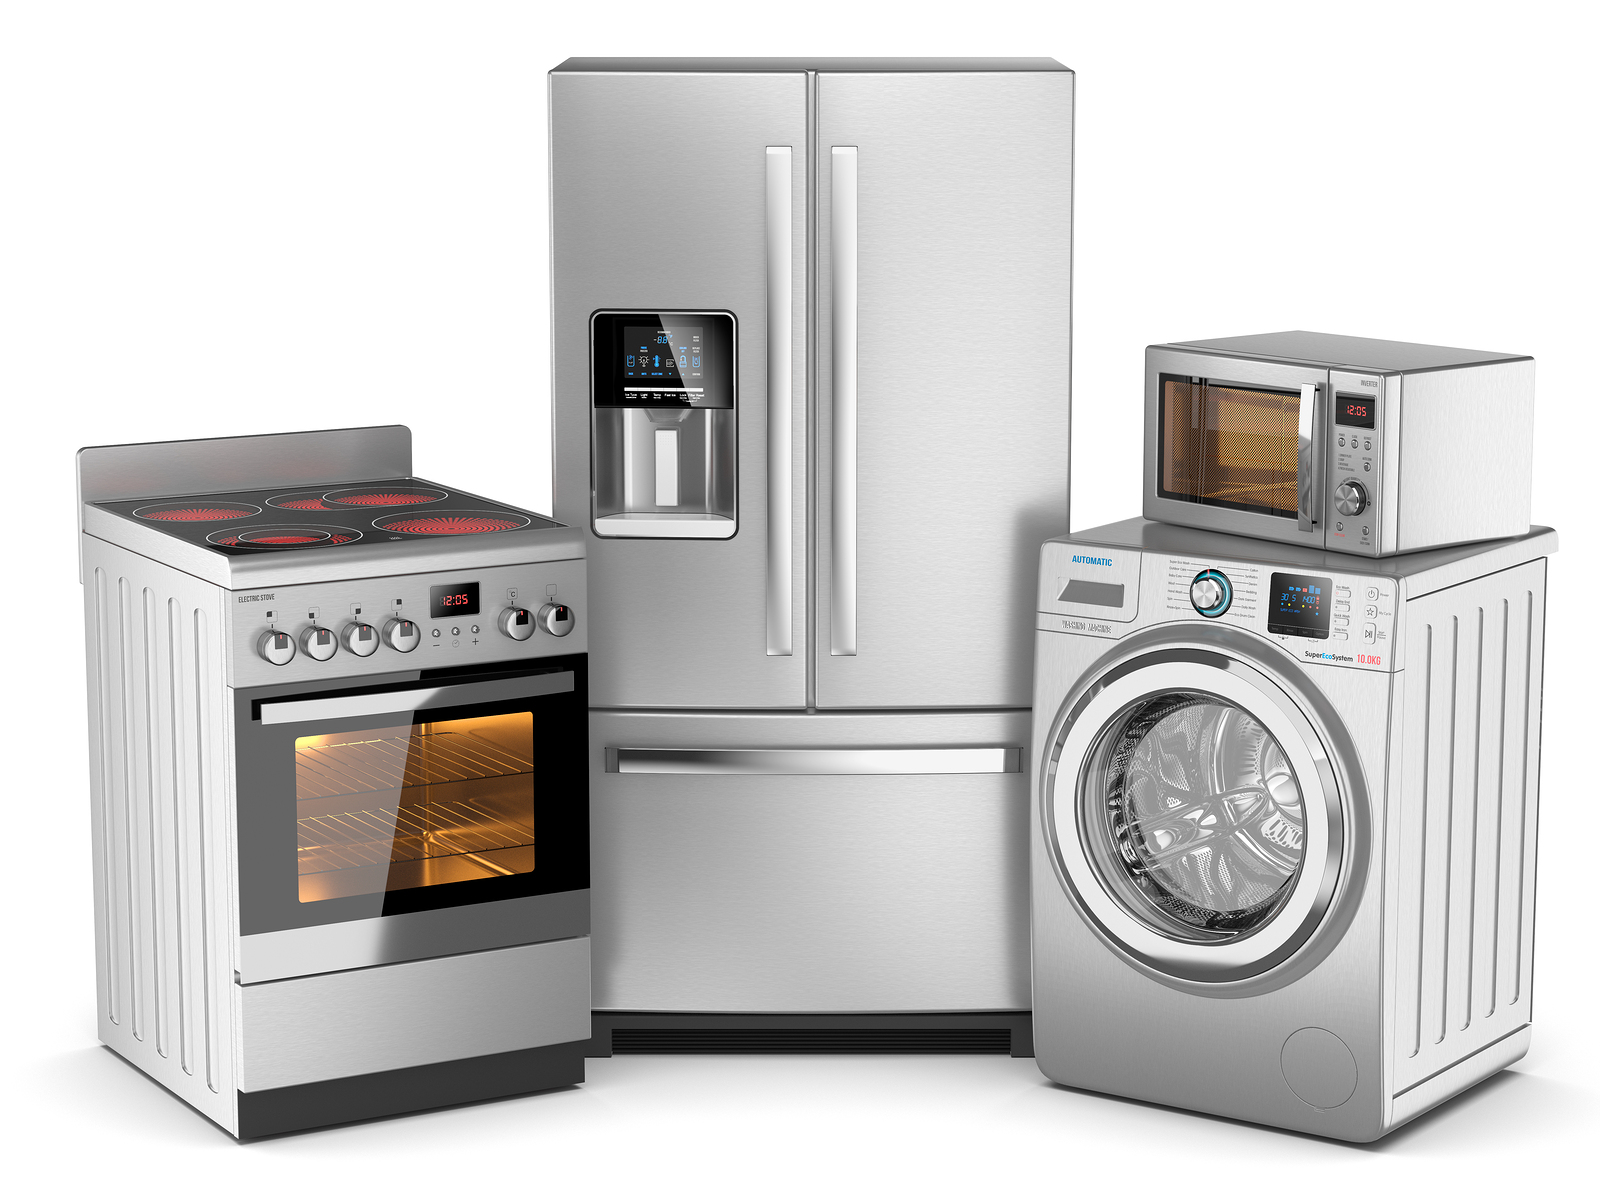 APPLIANCE REPAIR BUSINESS in Portland and Surrounding area